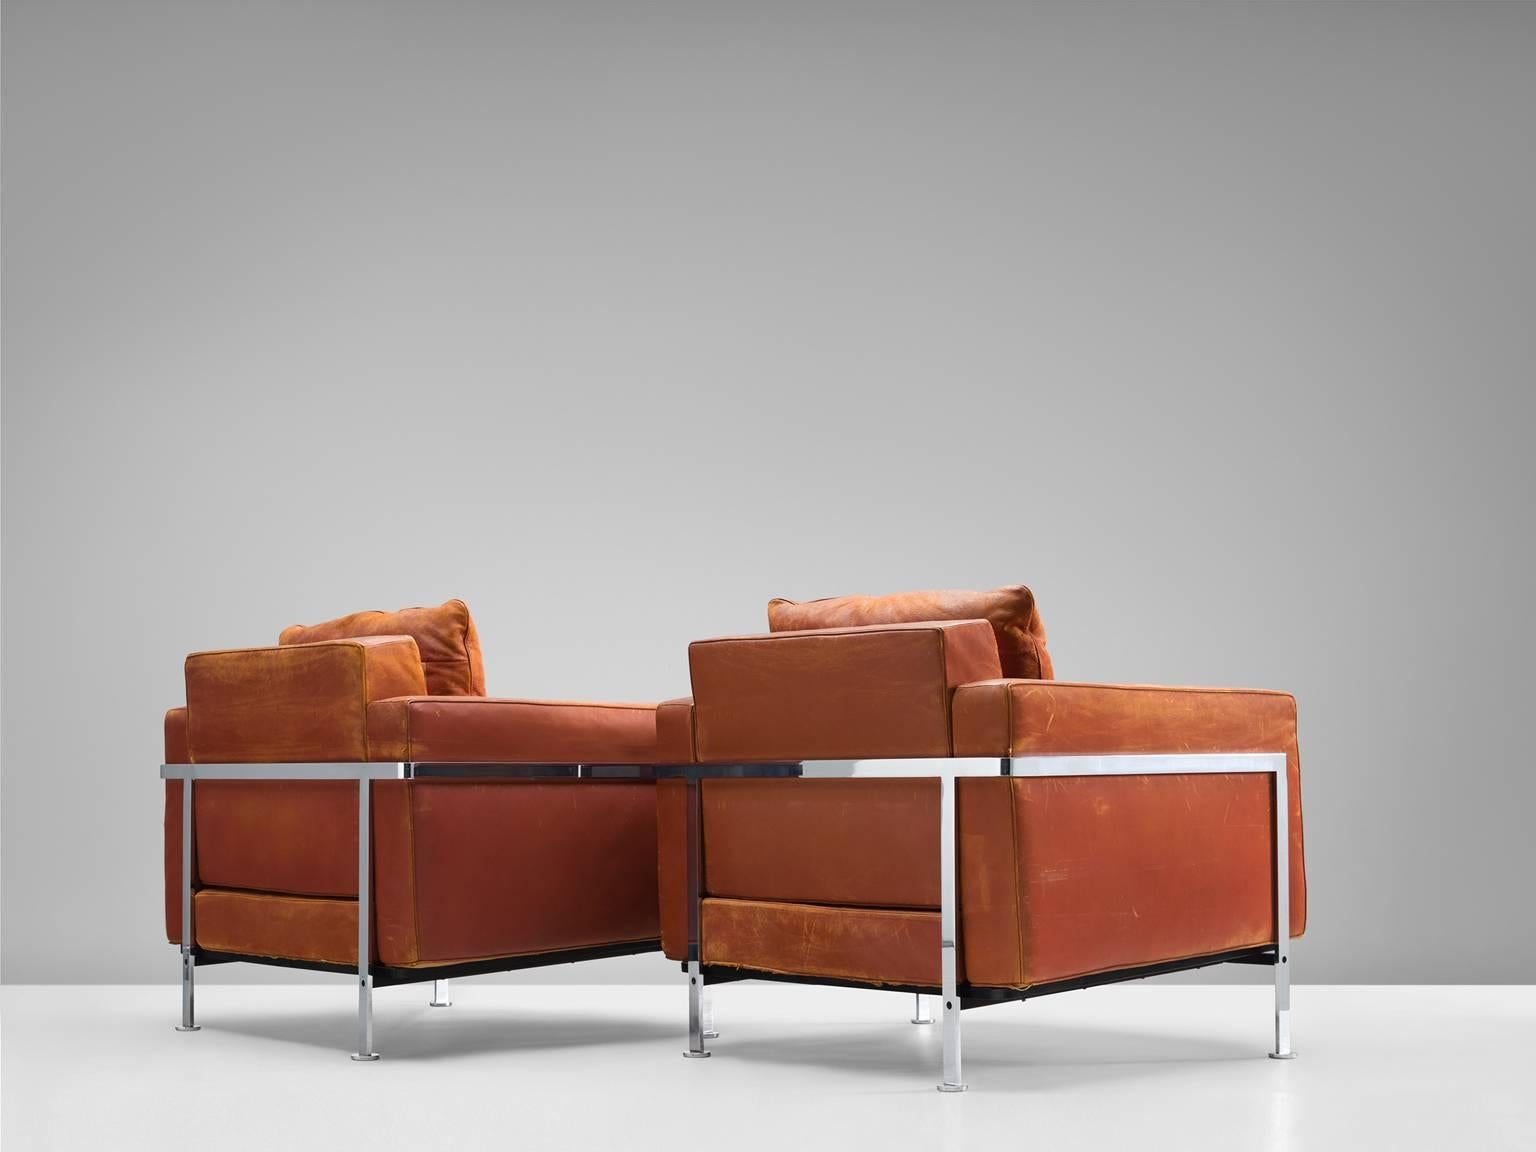 Hollywood Regency Robert Hausmann Pair of Cognac Leather Lounge Chairs for Desede Switzerland 1954